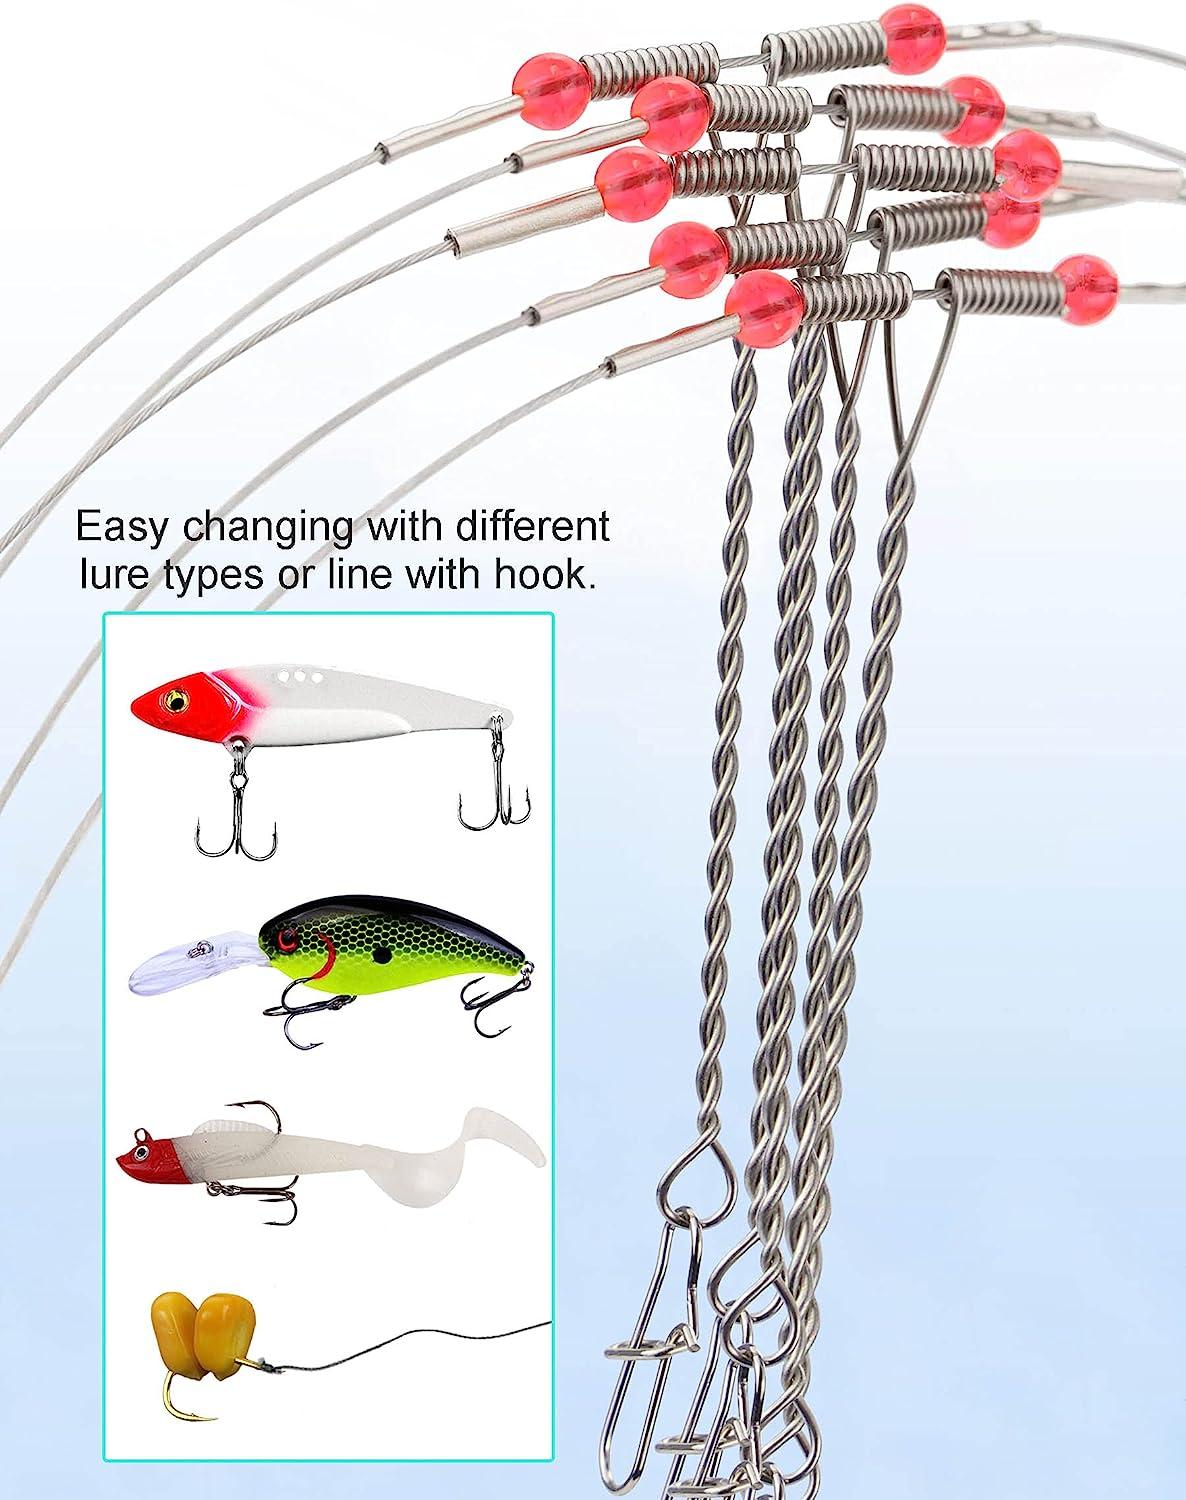 Buy Fishing Leader Saltwater Fishing Rigs Fishing Bottom Rigs Clear Nylon Leader  Surf Fishing Rigs Fishing Wire Leaders Rig Fishing Leaders with Swivel  Snaps Beads 1Arm / 2Arm Online at Lowest Price